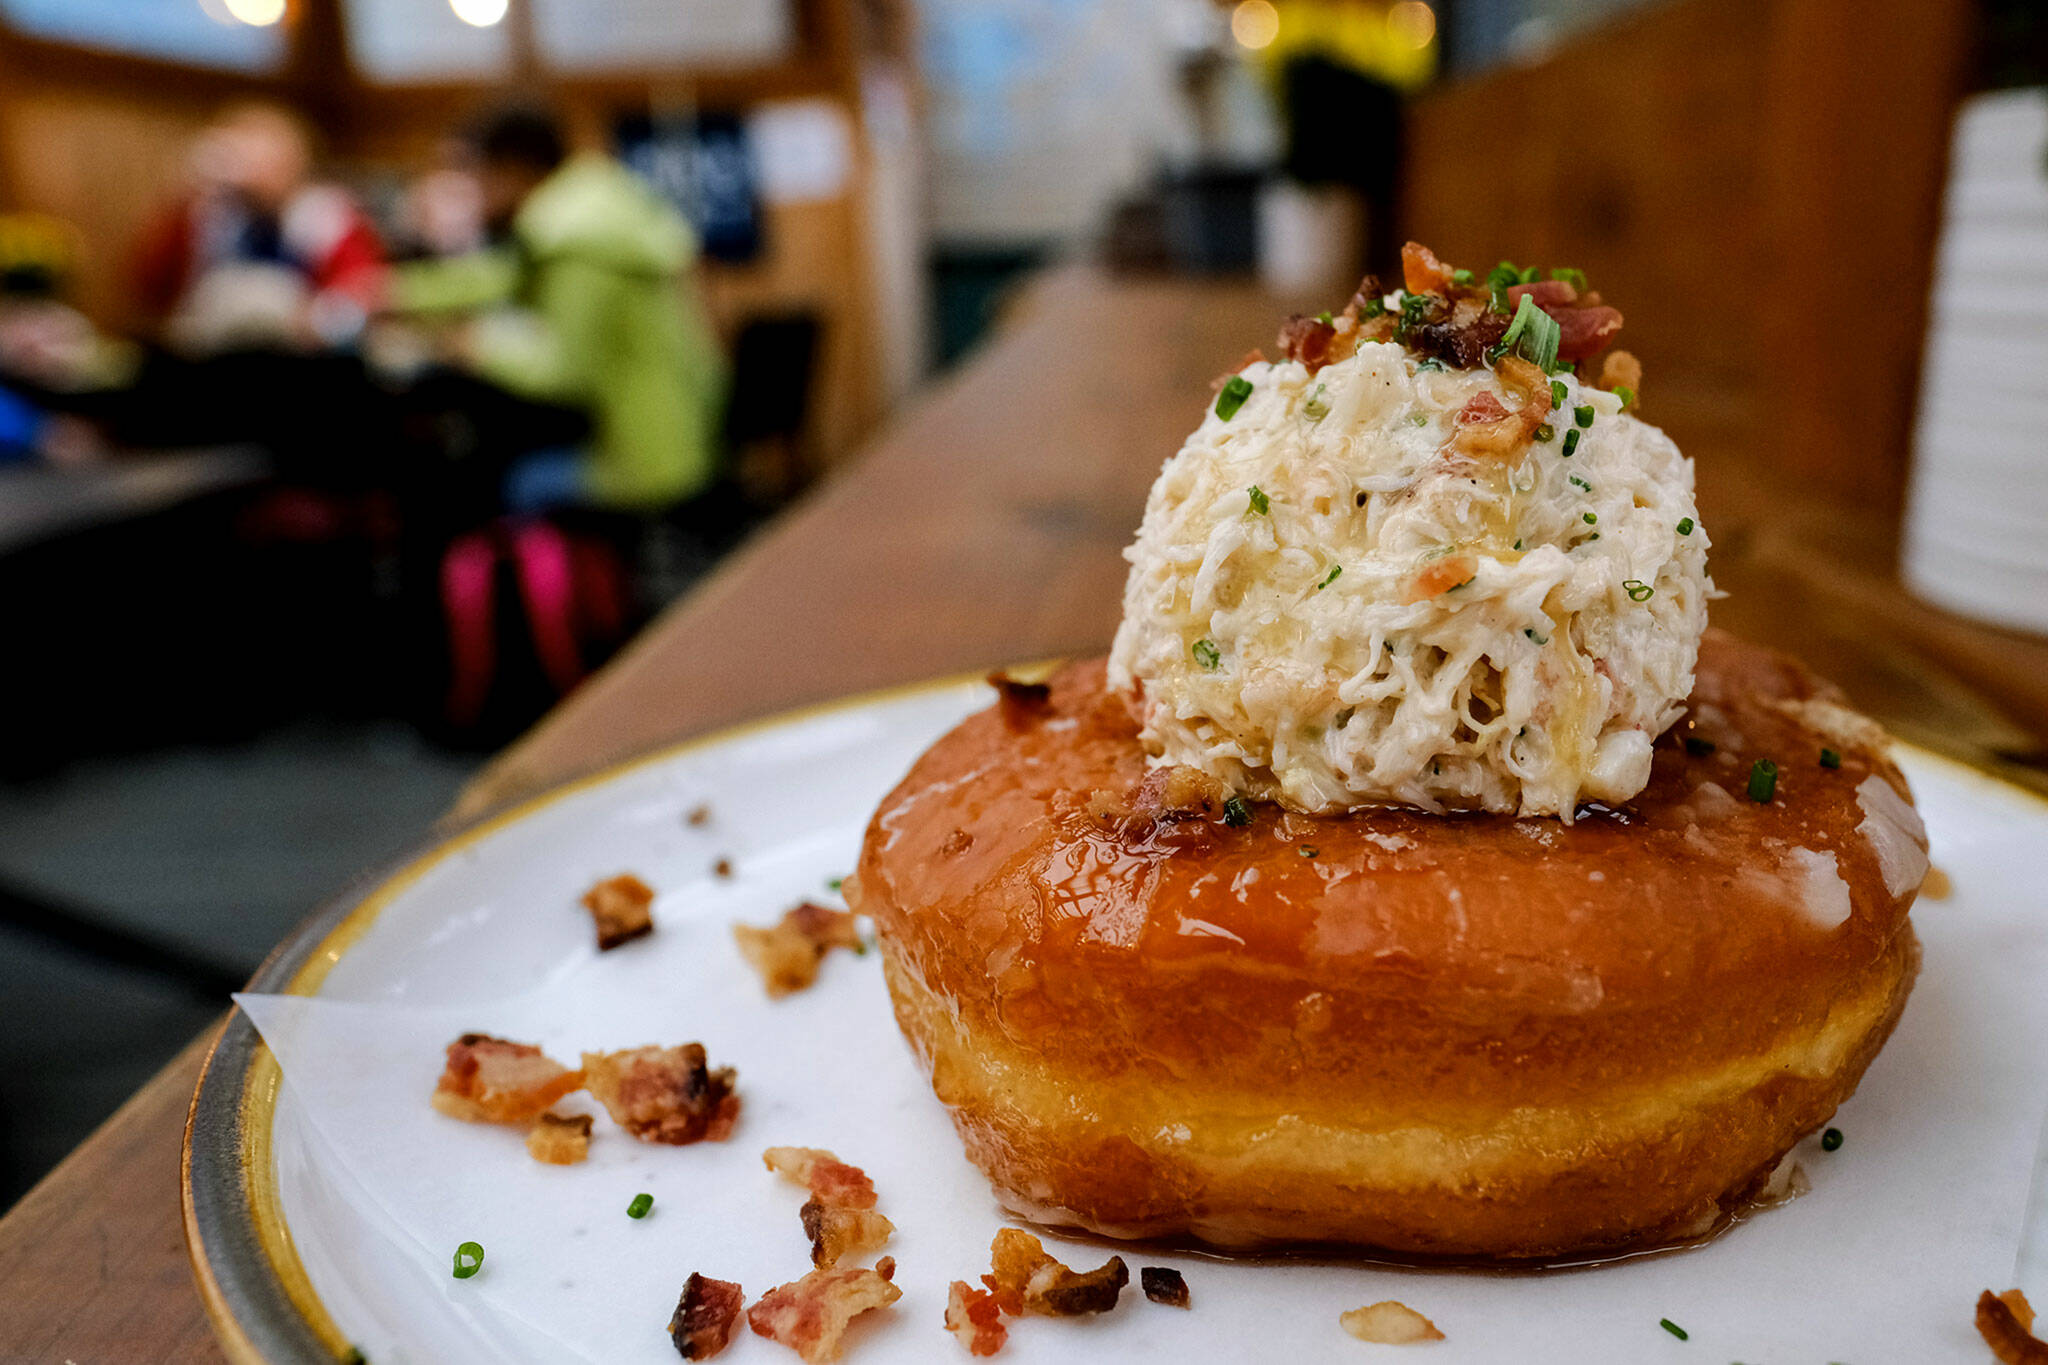 The crab doughnut at Market in Edmonds is a strange delight, with a sweet and dense glazed doughnut topped with bright and briny dungeness crab salad, nutty browned butter and a shower of smoky bacon bits. (Taylor Goebel / The Herald)